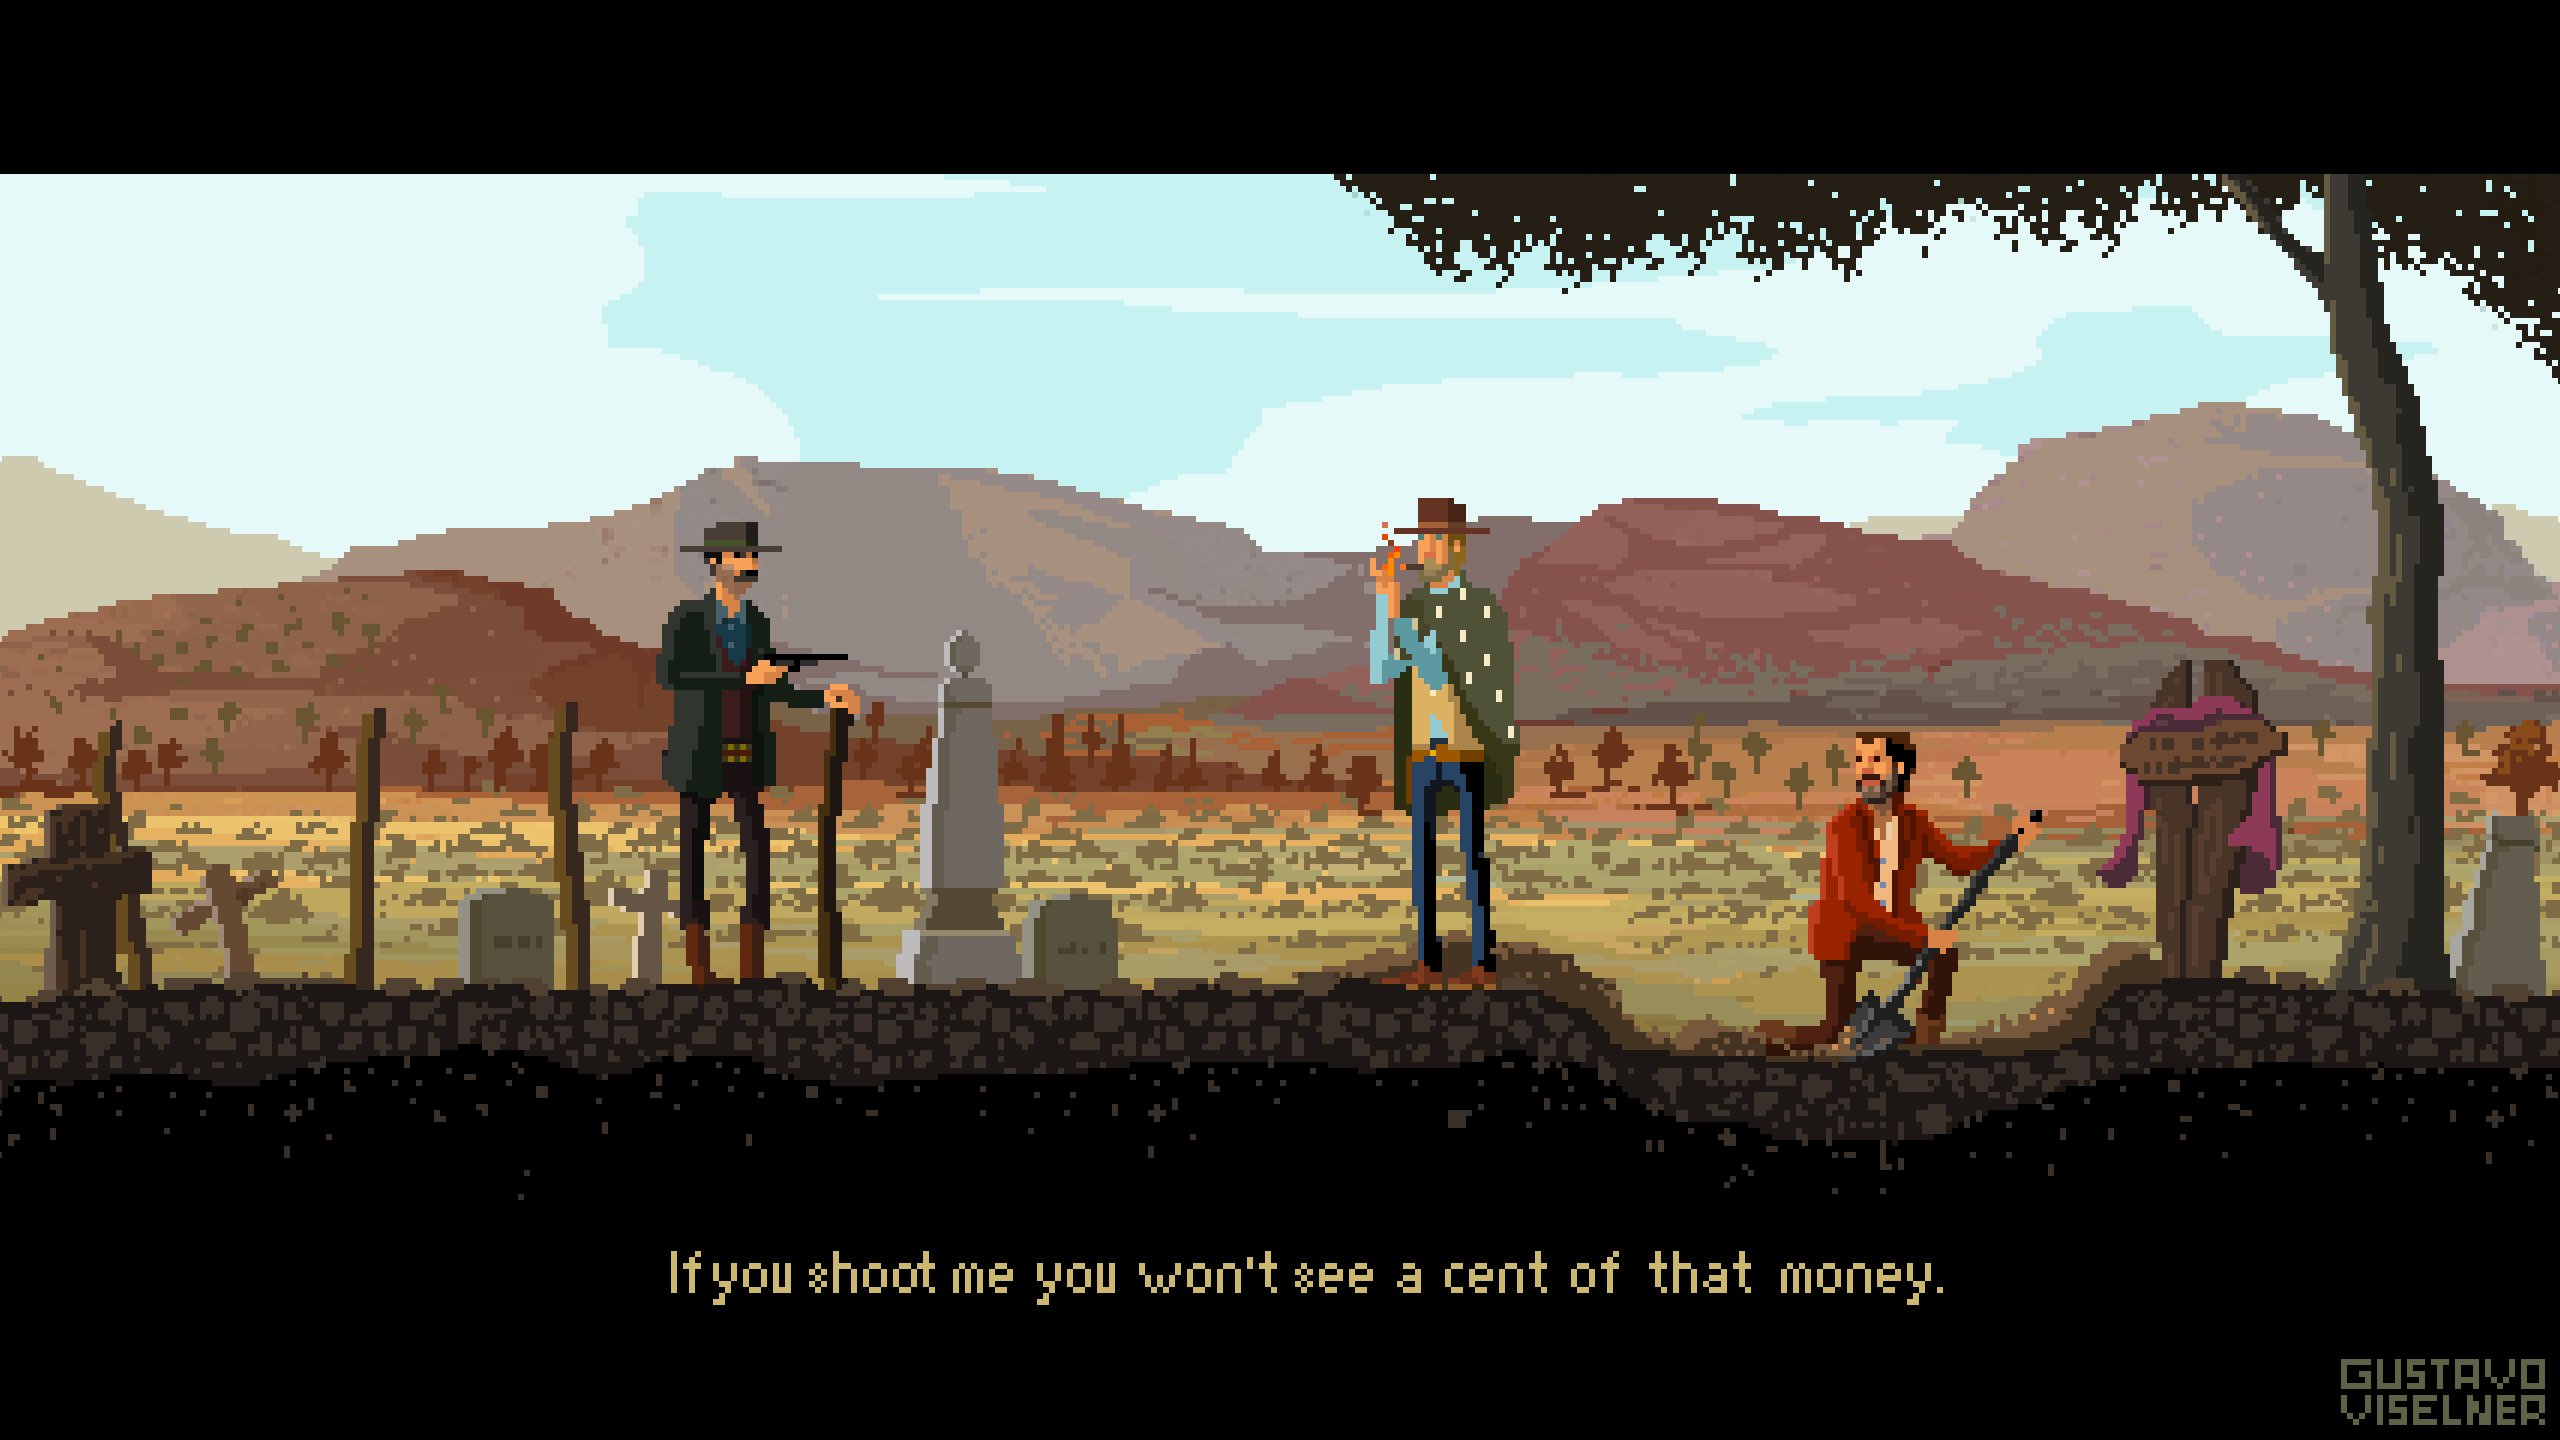 Those With Loaded Guns And Those Who Dig Wallpaper - Good The Bad And The Ugly Money - HD Wallpaper 